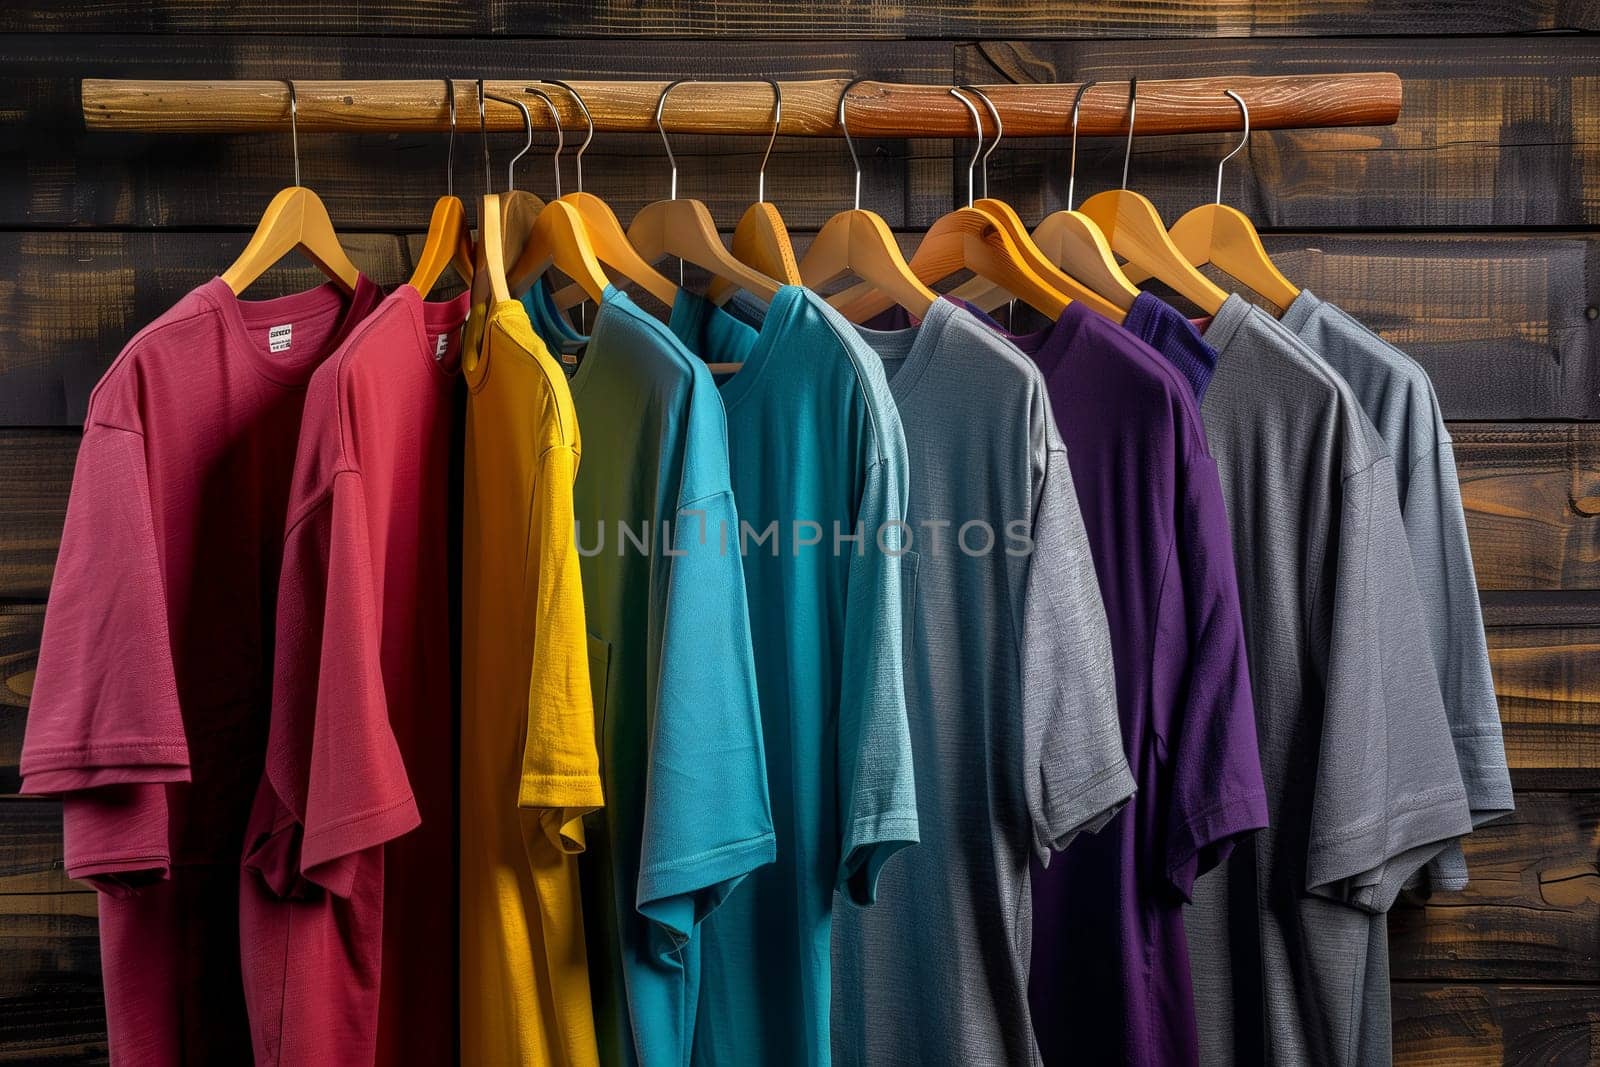 Colorful tshirts on wooden rack, showcasing fashion design and textiles by richwolf